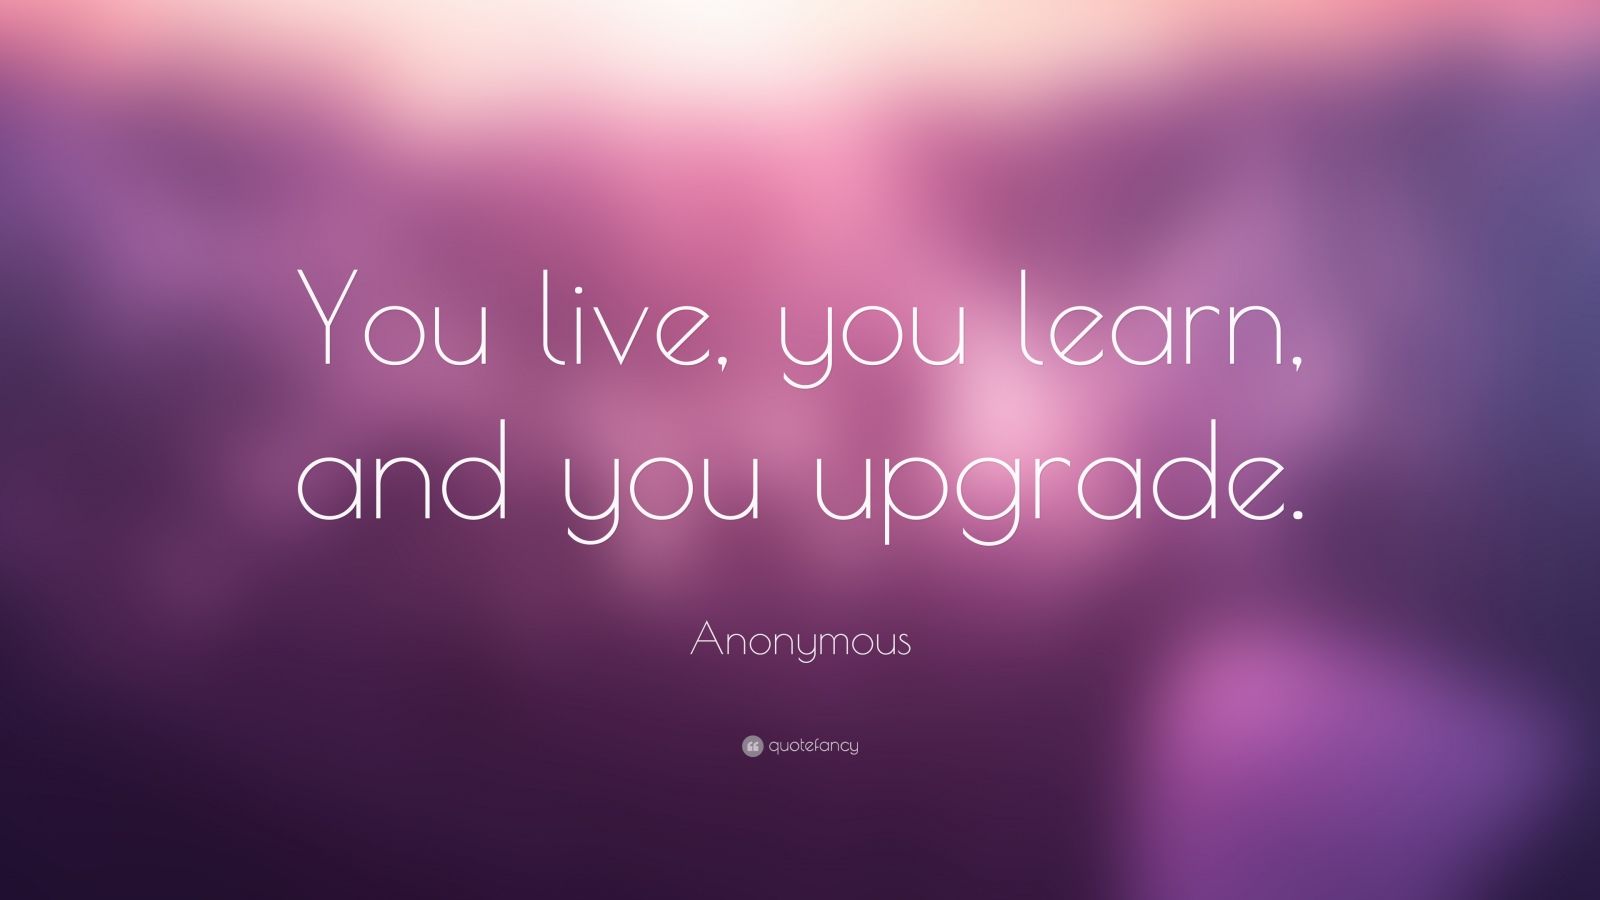 Anonymous Quote: “You live, you learn, and you upgrade.” (26 wallpapers ...